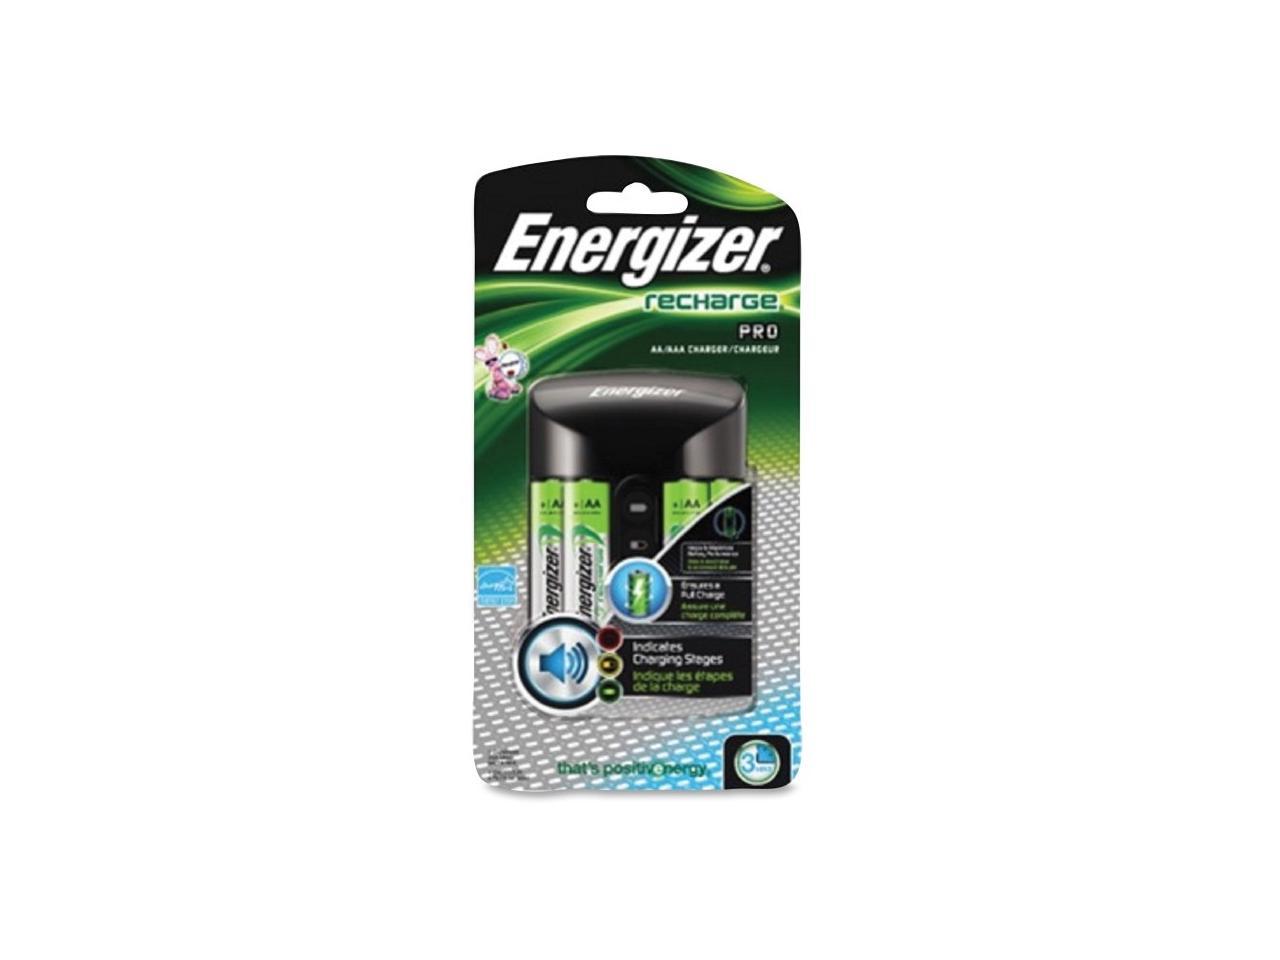 ENERGIZER Recharge Pro AA AAA Ni-Mh Battery Charger